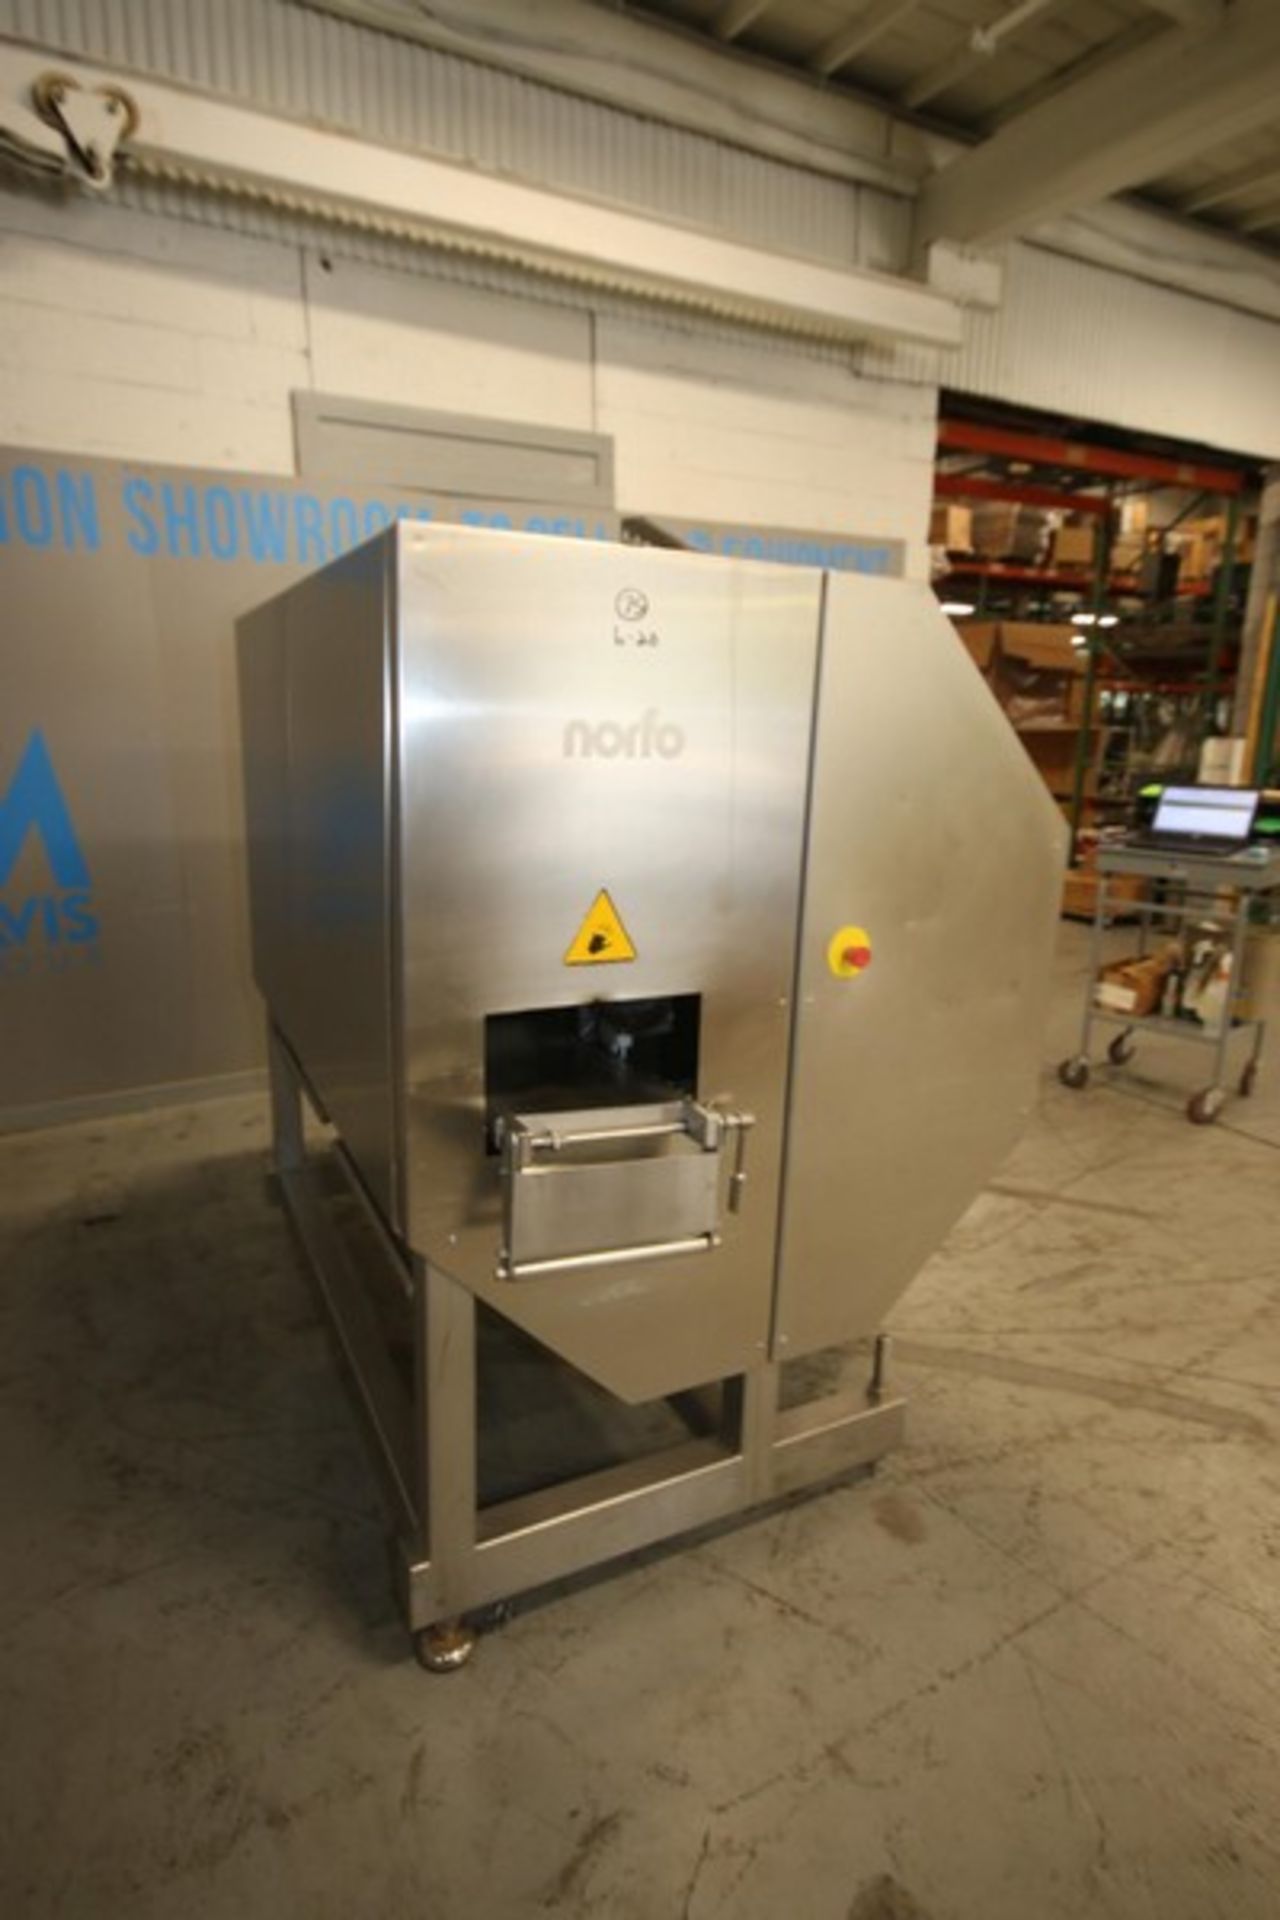 Norfo S/S Portion Cutter, Type: 598.80.87, 220 Volts, 3 Phase, with Aprox. 12" W Infeed/Outfeed - Image 3 of 10